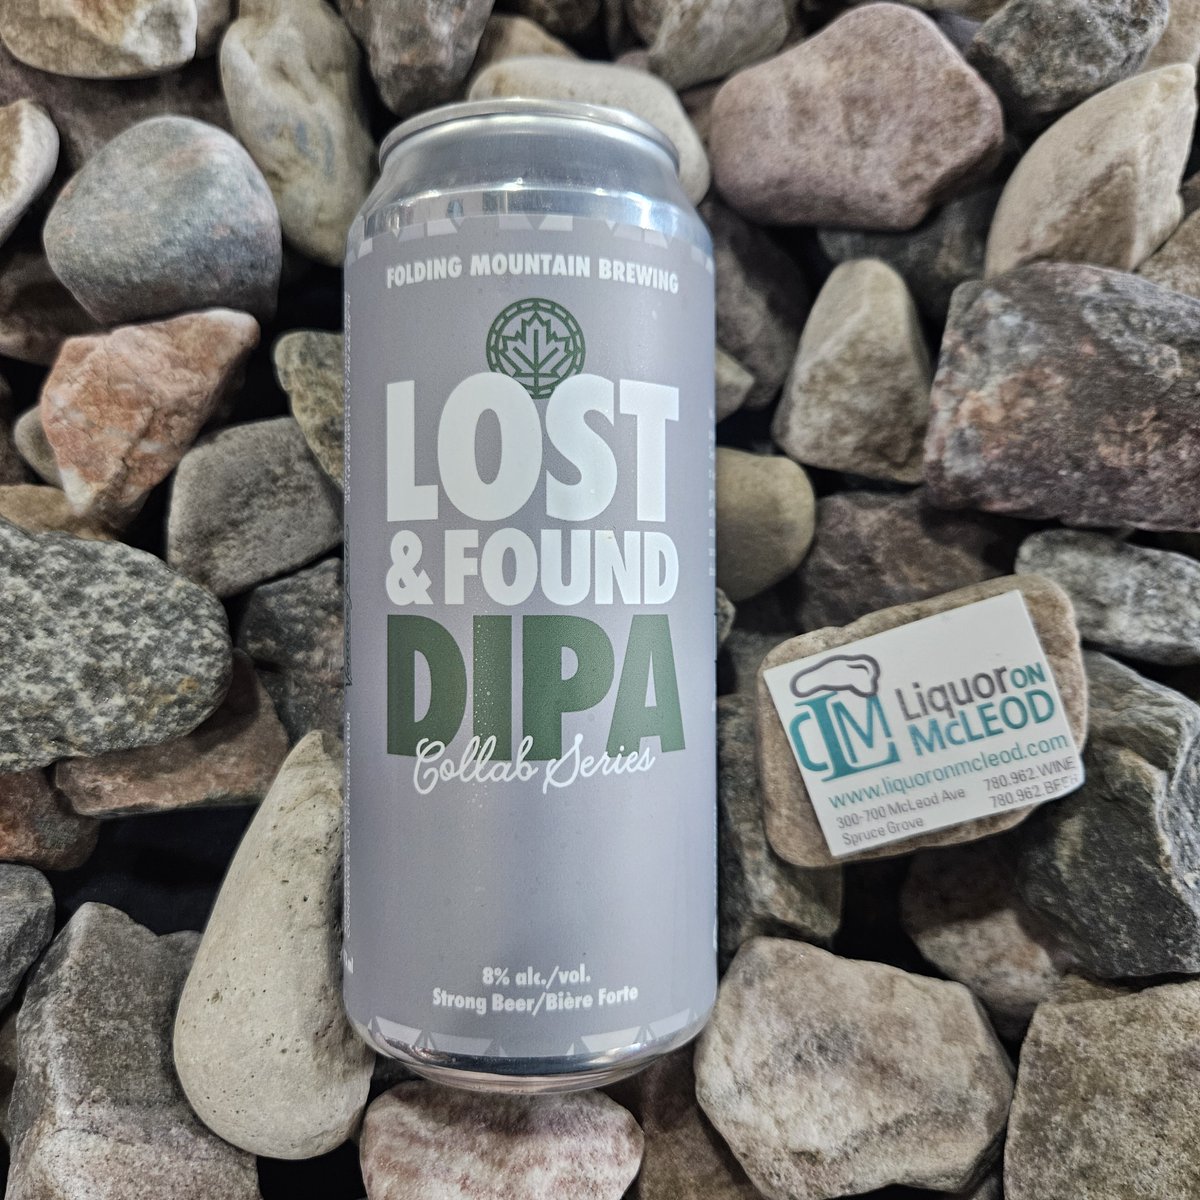 @foldingmountian LOADED this beer with hoppiness and flavor thanks to cutting-edge technology in hop extracts. They balanced all the hoppiness with the warmth of higher alcohol and more sweetness from malt.

#foldingmountain #srpucegrove #stonyplain #liquoronmcleod